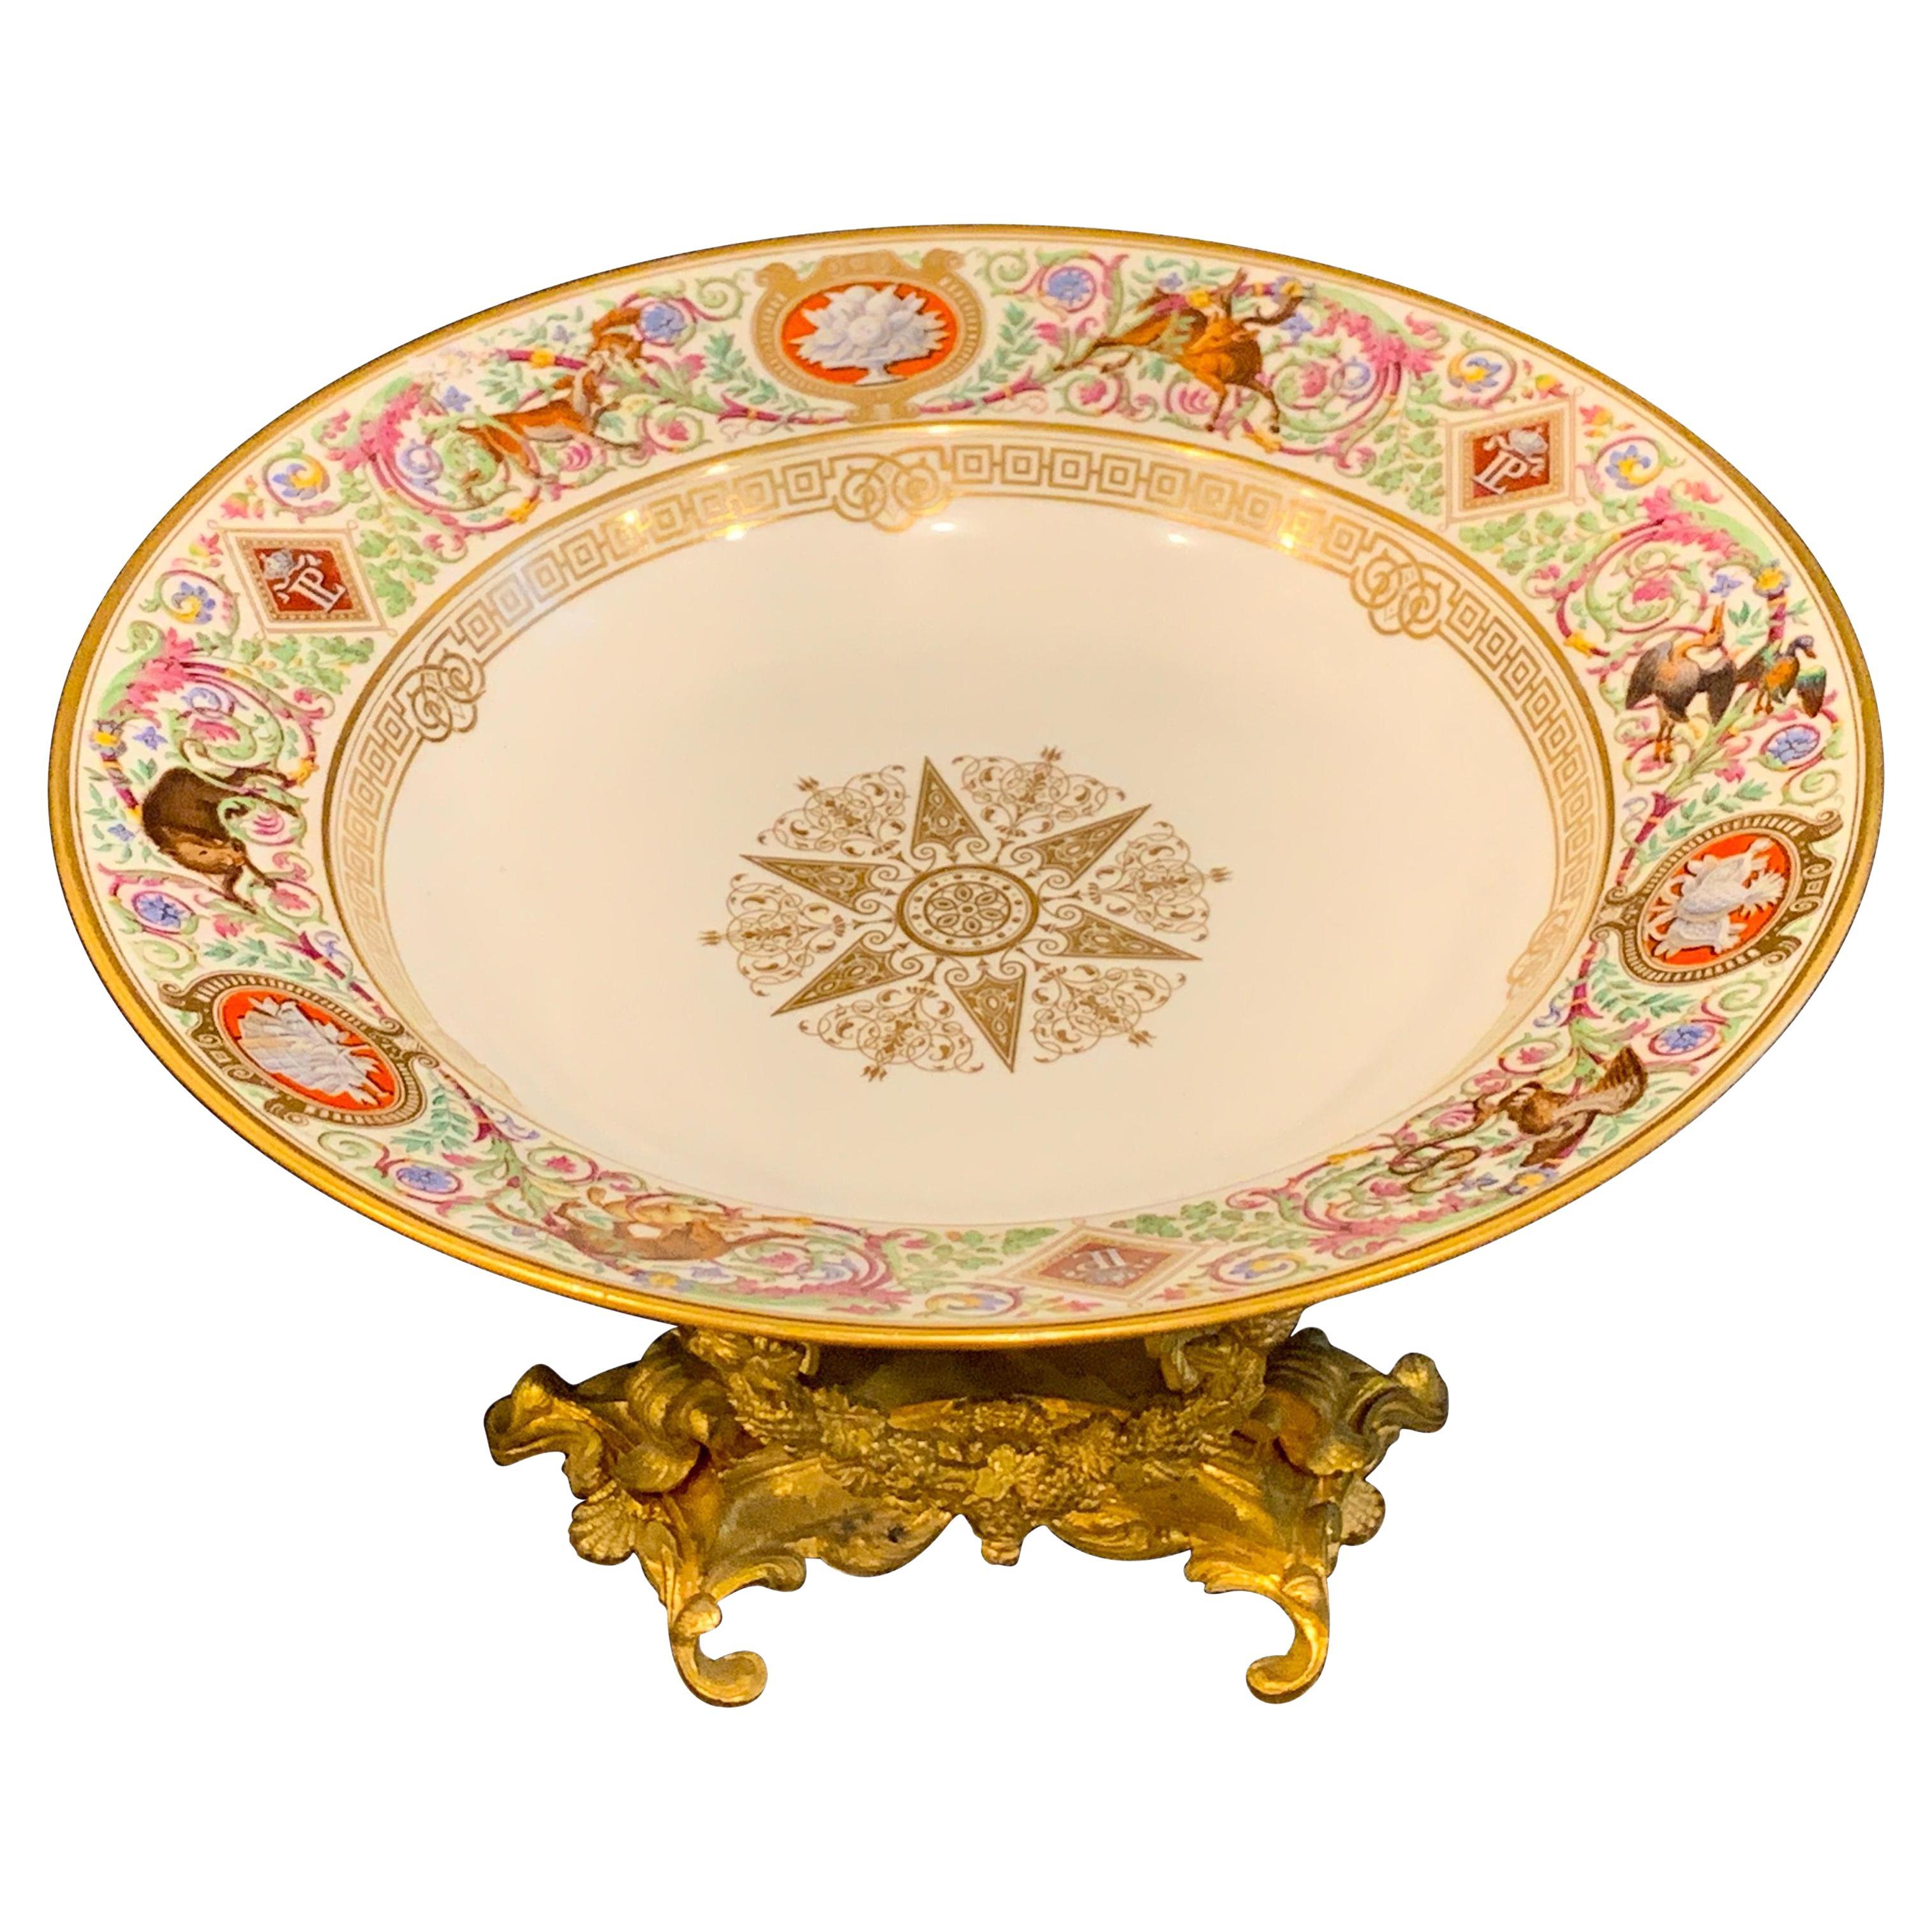 Sevres Porcelain Ormolu Tazza, from the Hunting Service of King Louis Philippe